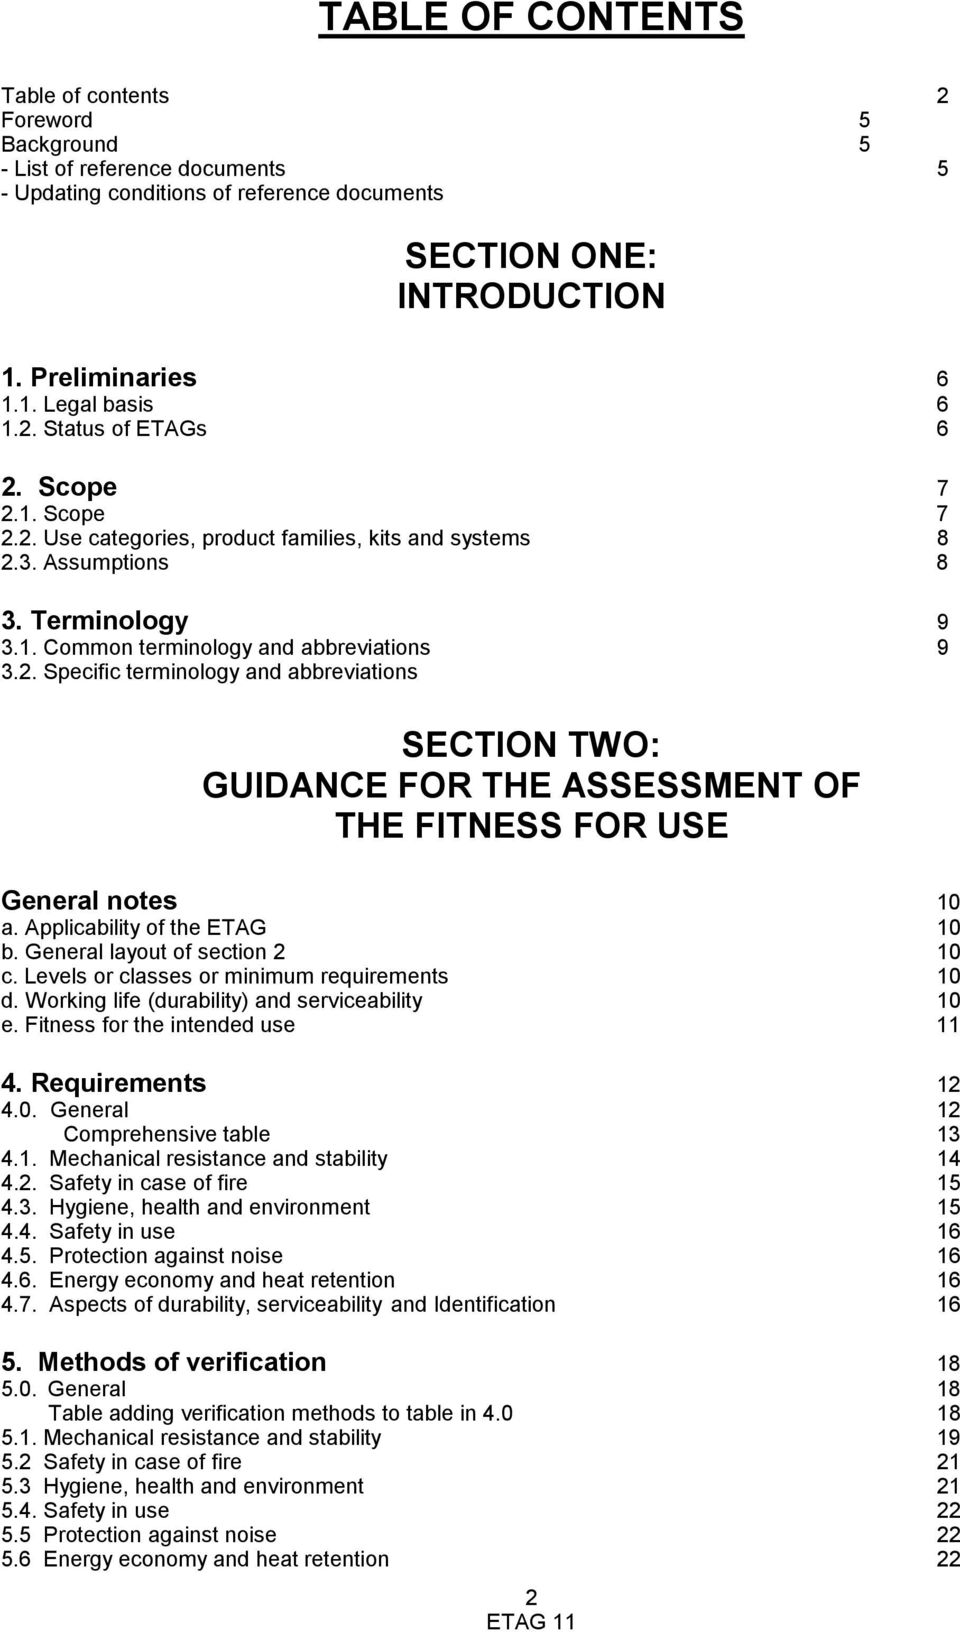 Applicability of the ETAG 10 b. General layout of section 2 10 c. Levels or classes or minimum requirements 10 d. Working life (durability) and serviceability 10 e. Fitness for the intended use 11 4.